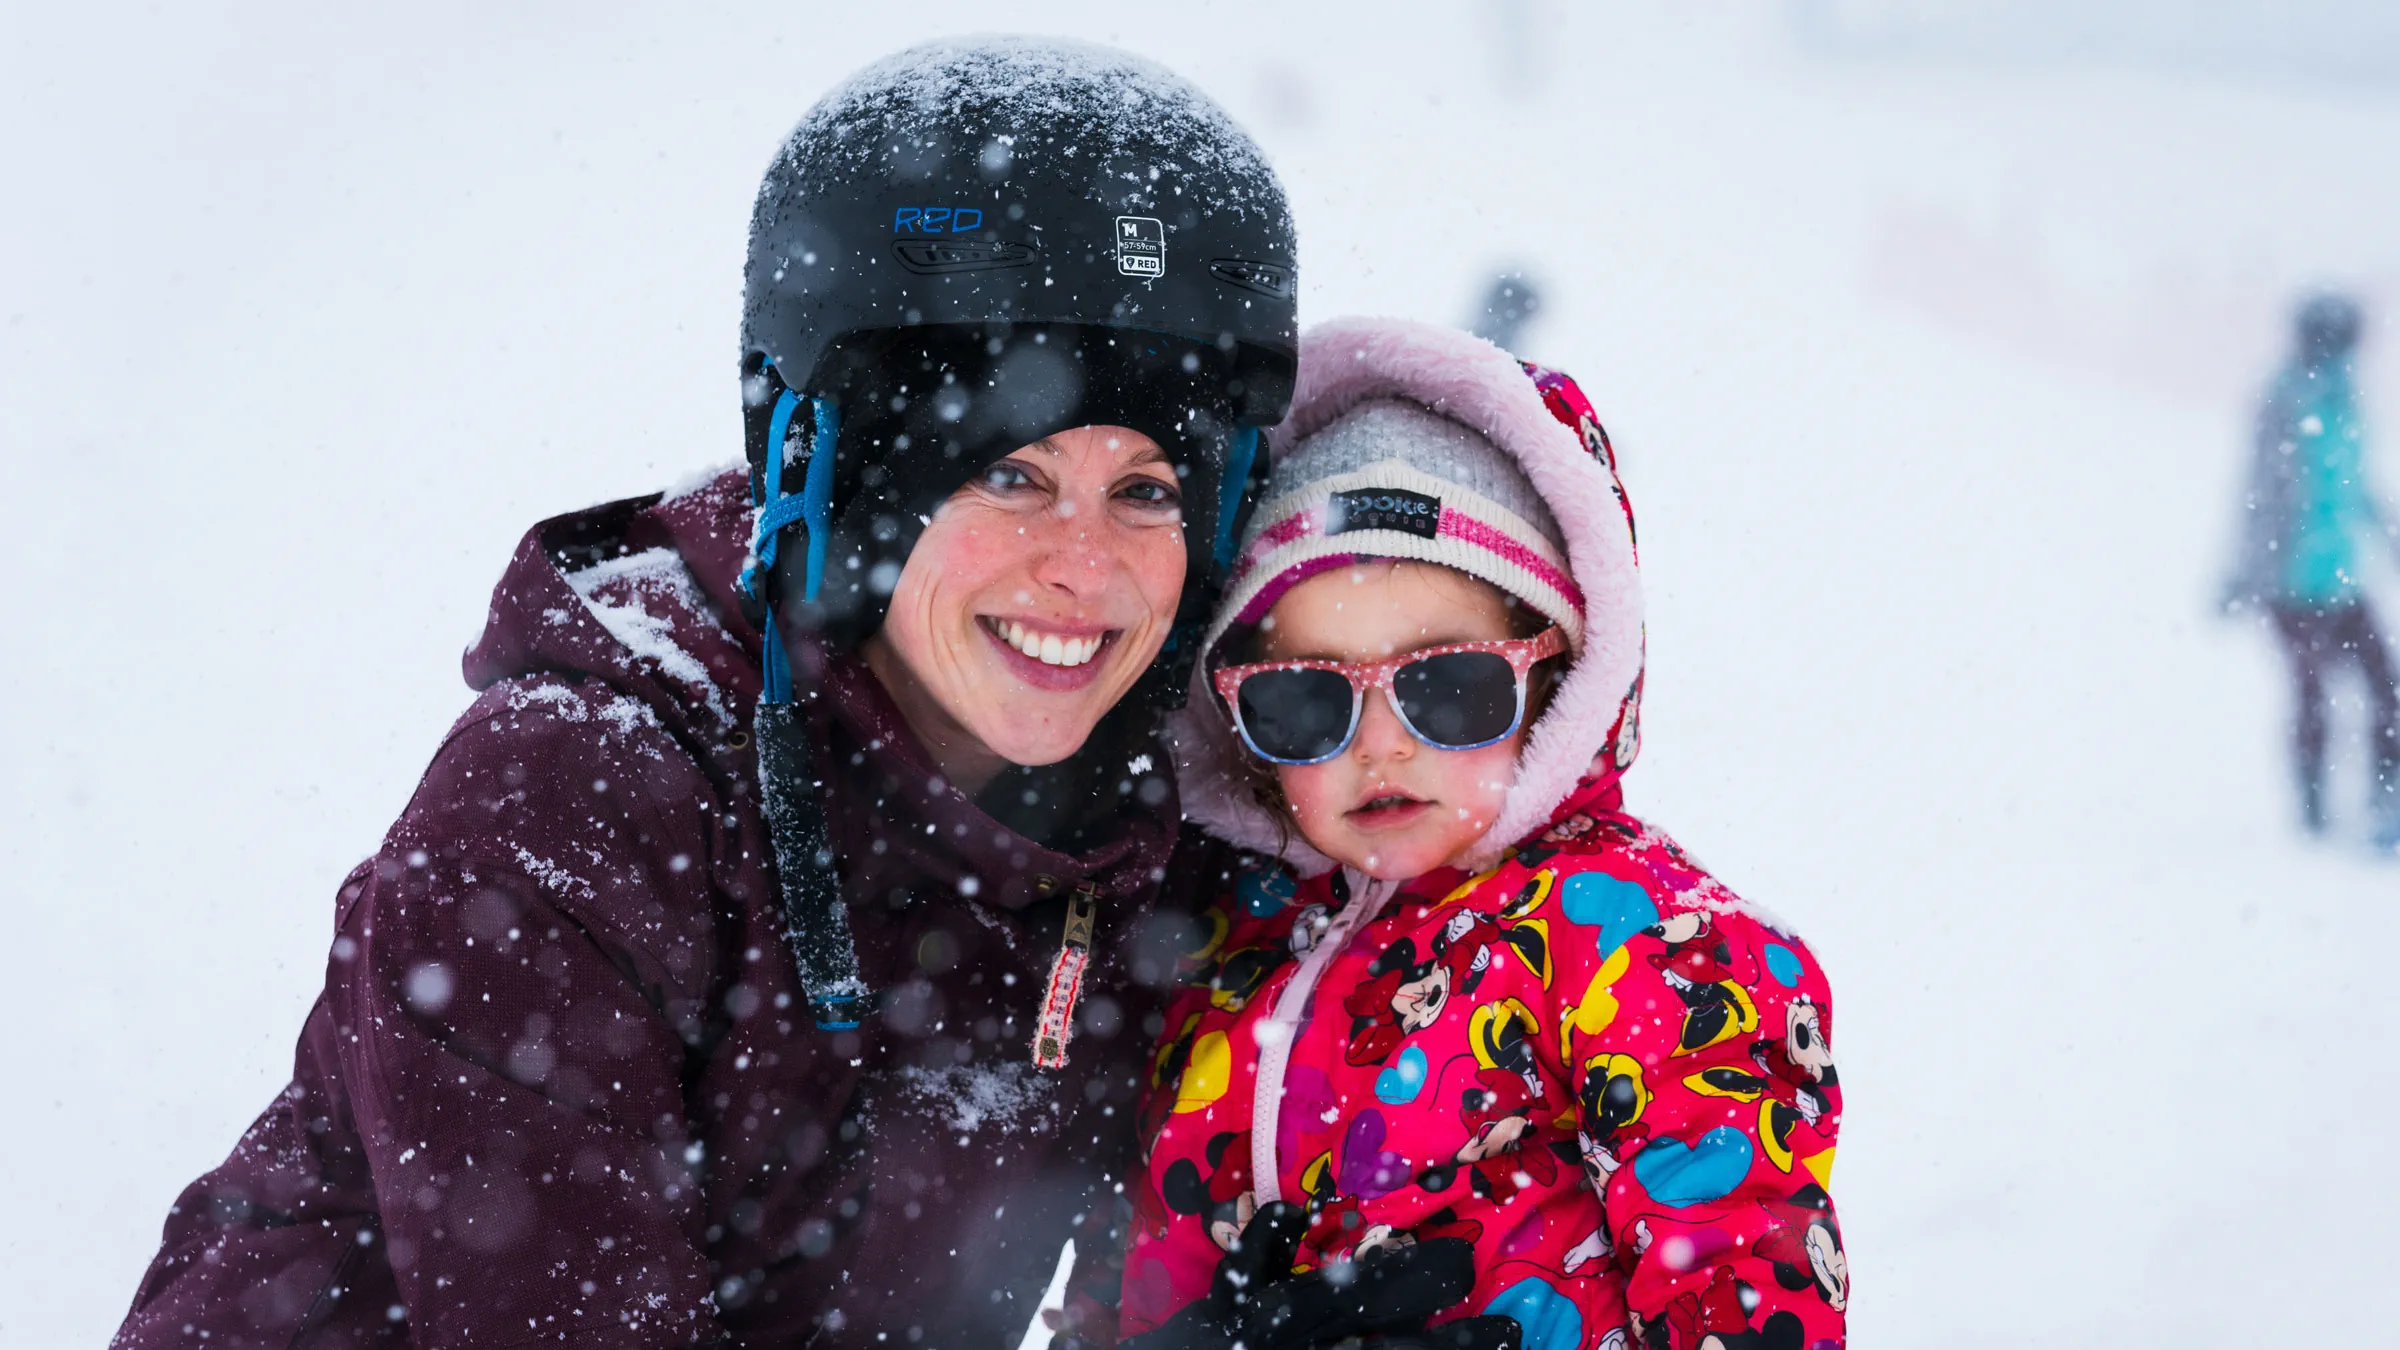 Adult with their child smiling at the camera during a snow storm